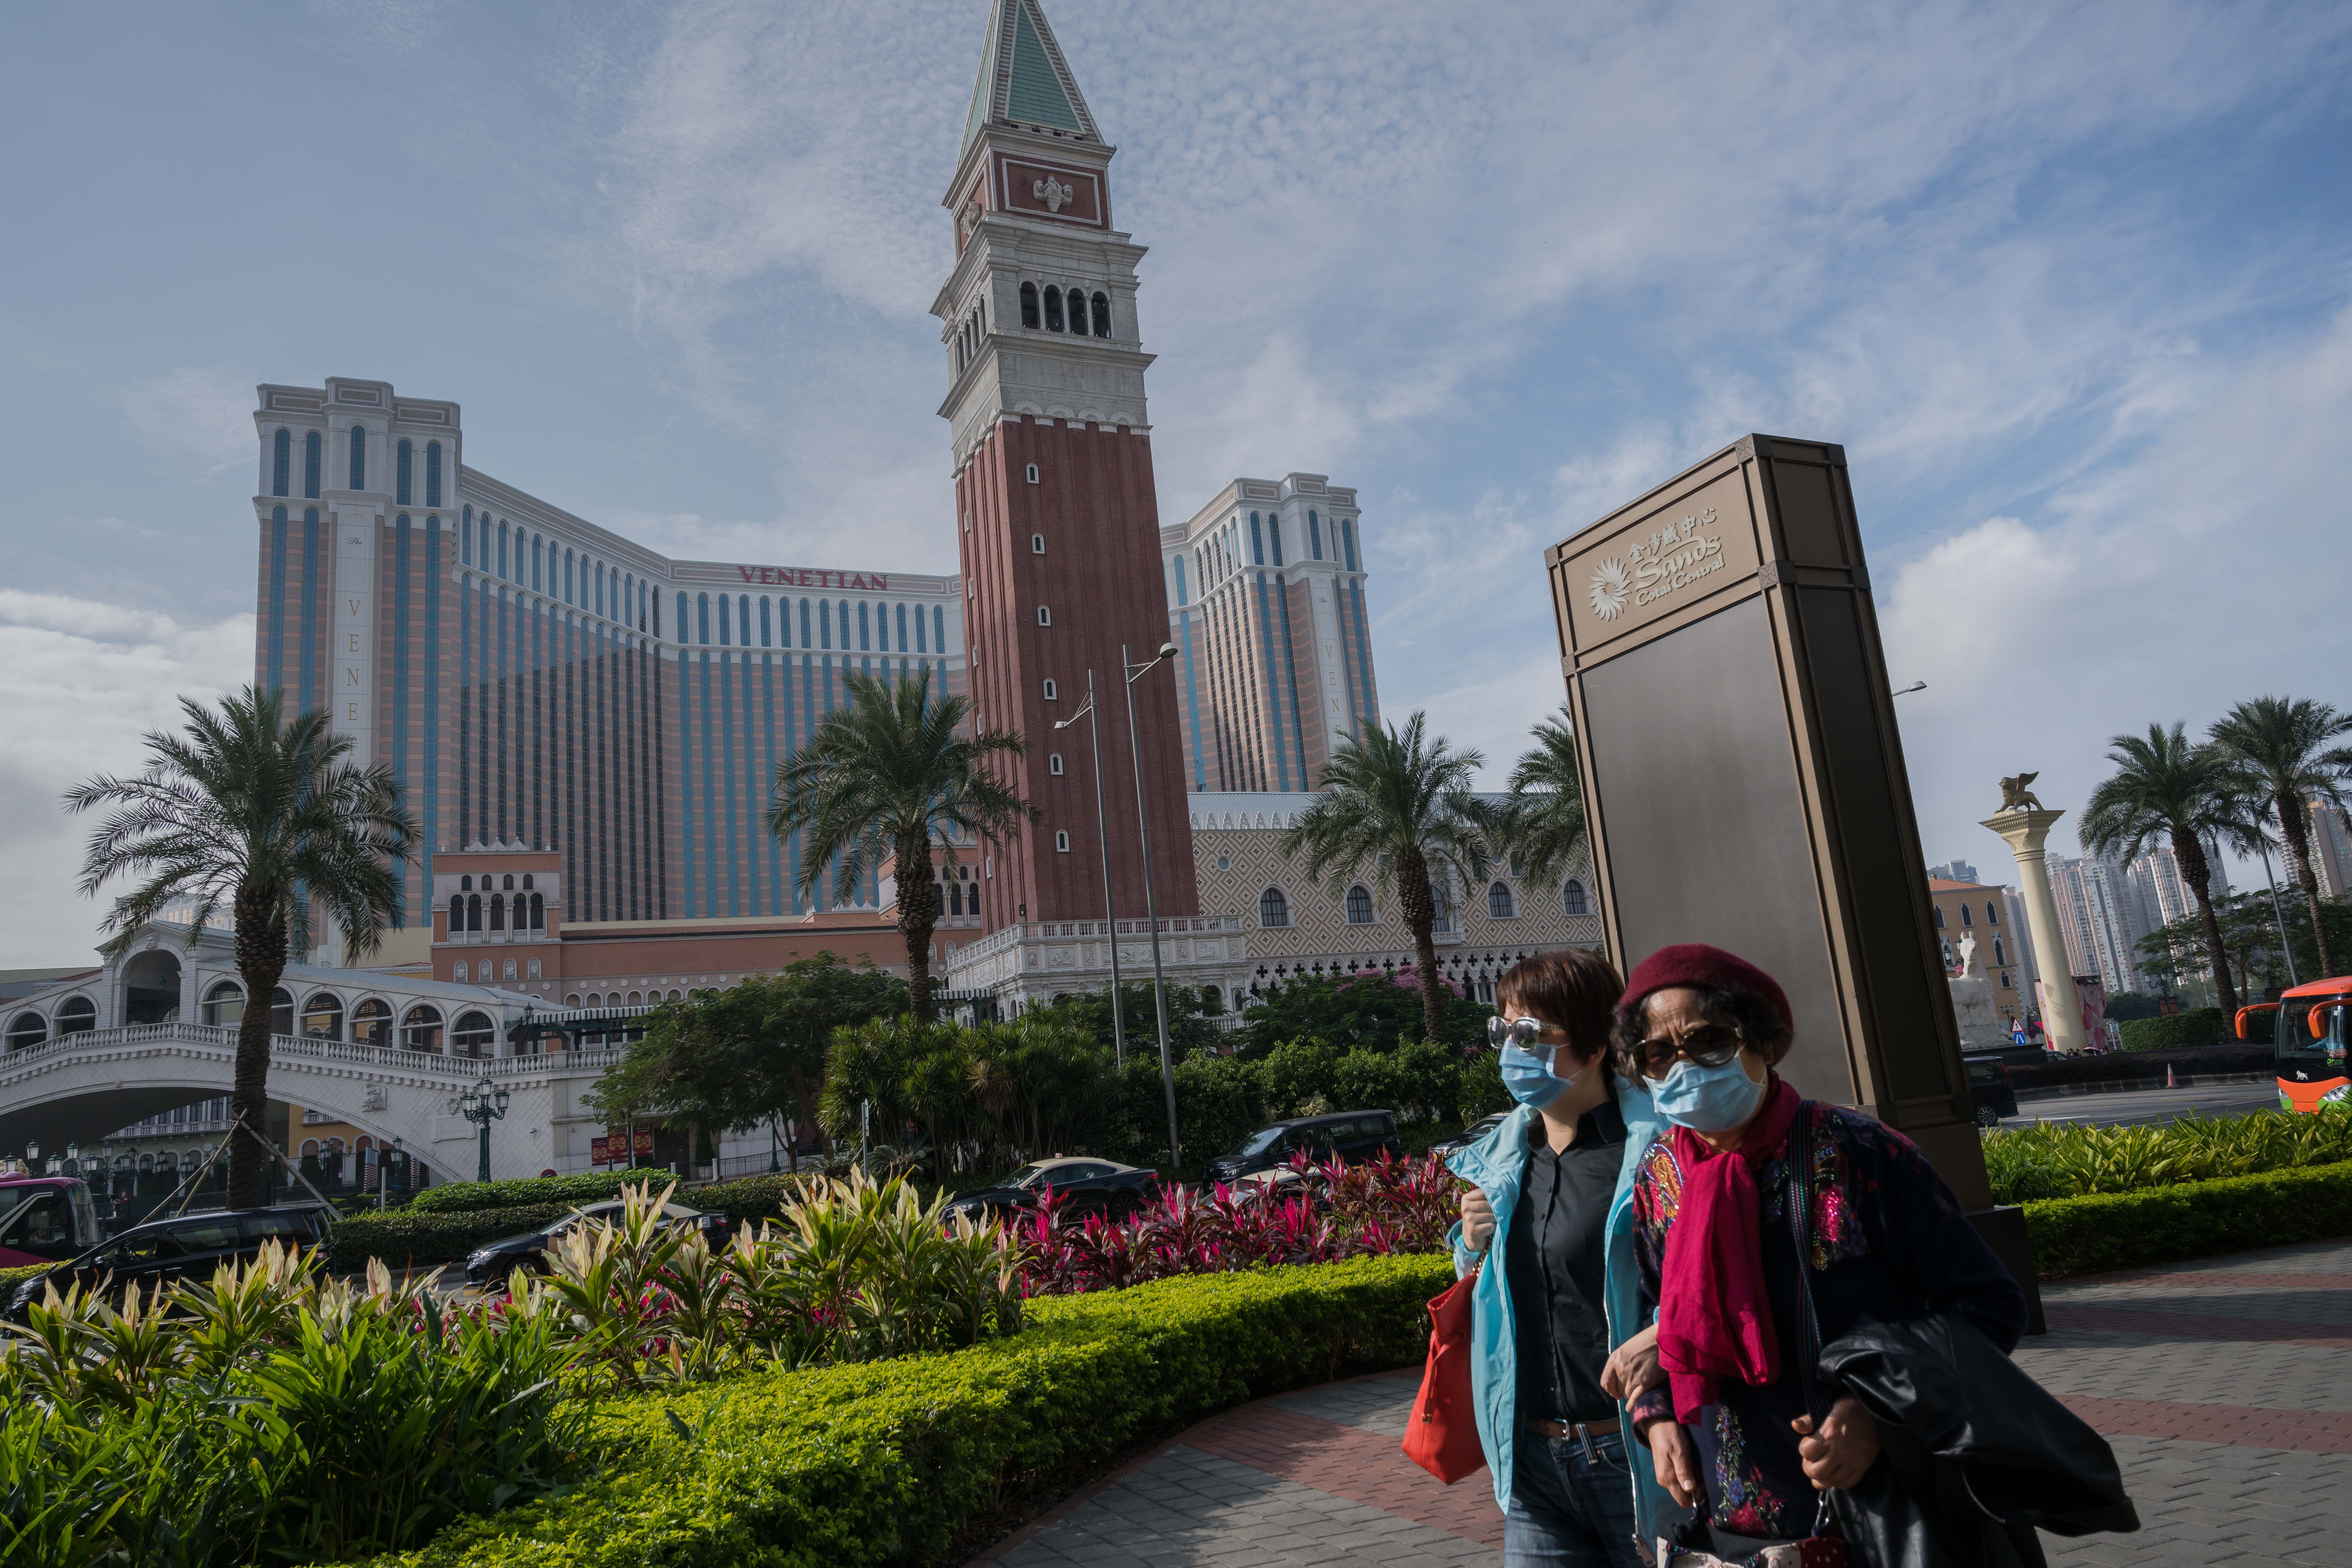 Pedestrians in protective medical masks walk past the Sands Cotai Central and Venetian Macao casino resorts, operated by Sands China, in Macau on January 24, 2020. Photo: Bloomberg